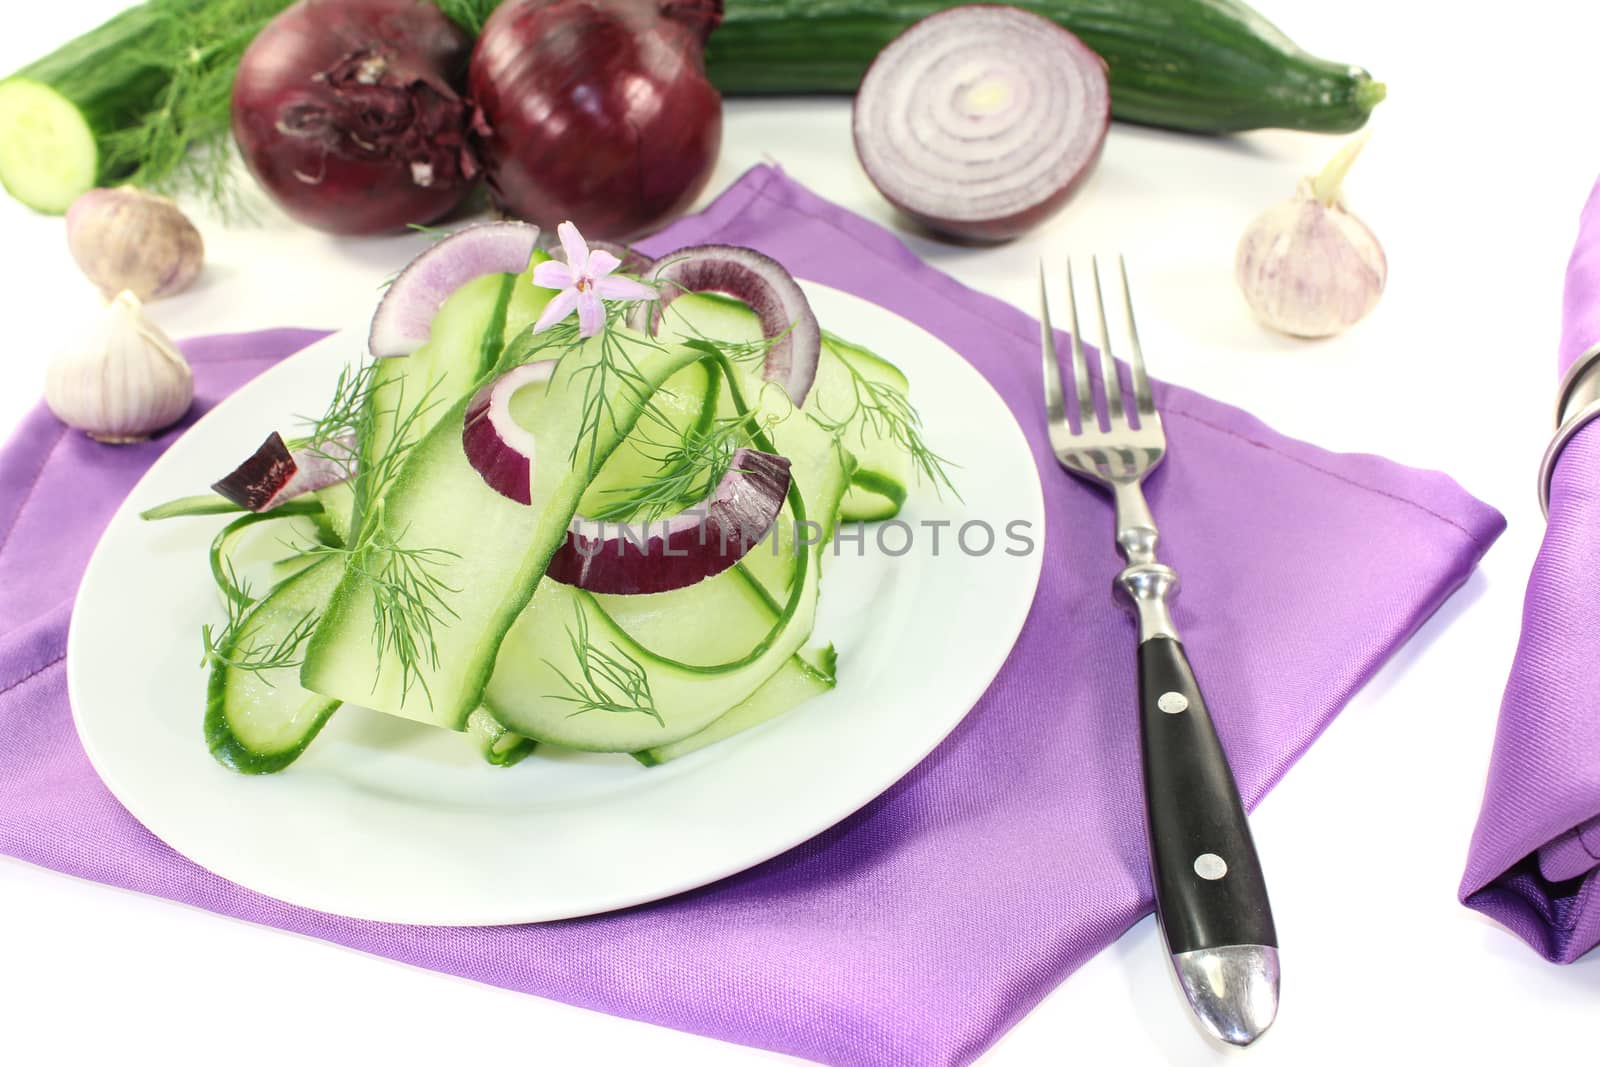 Cucumber salad with red onions, garlic flower and dill on light background